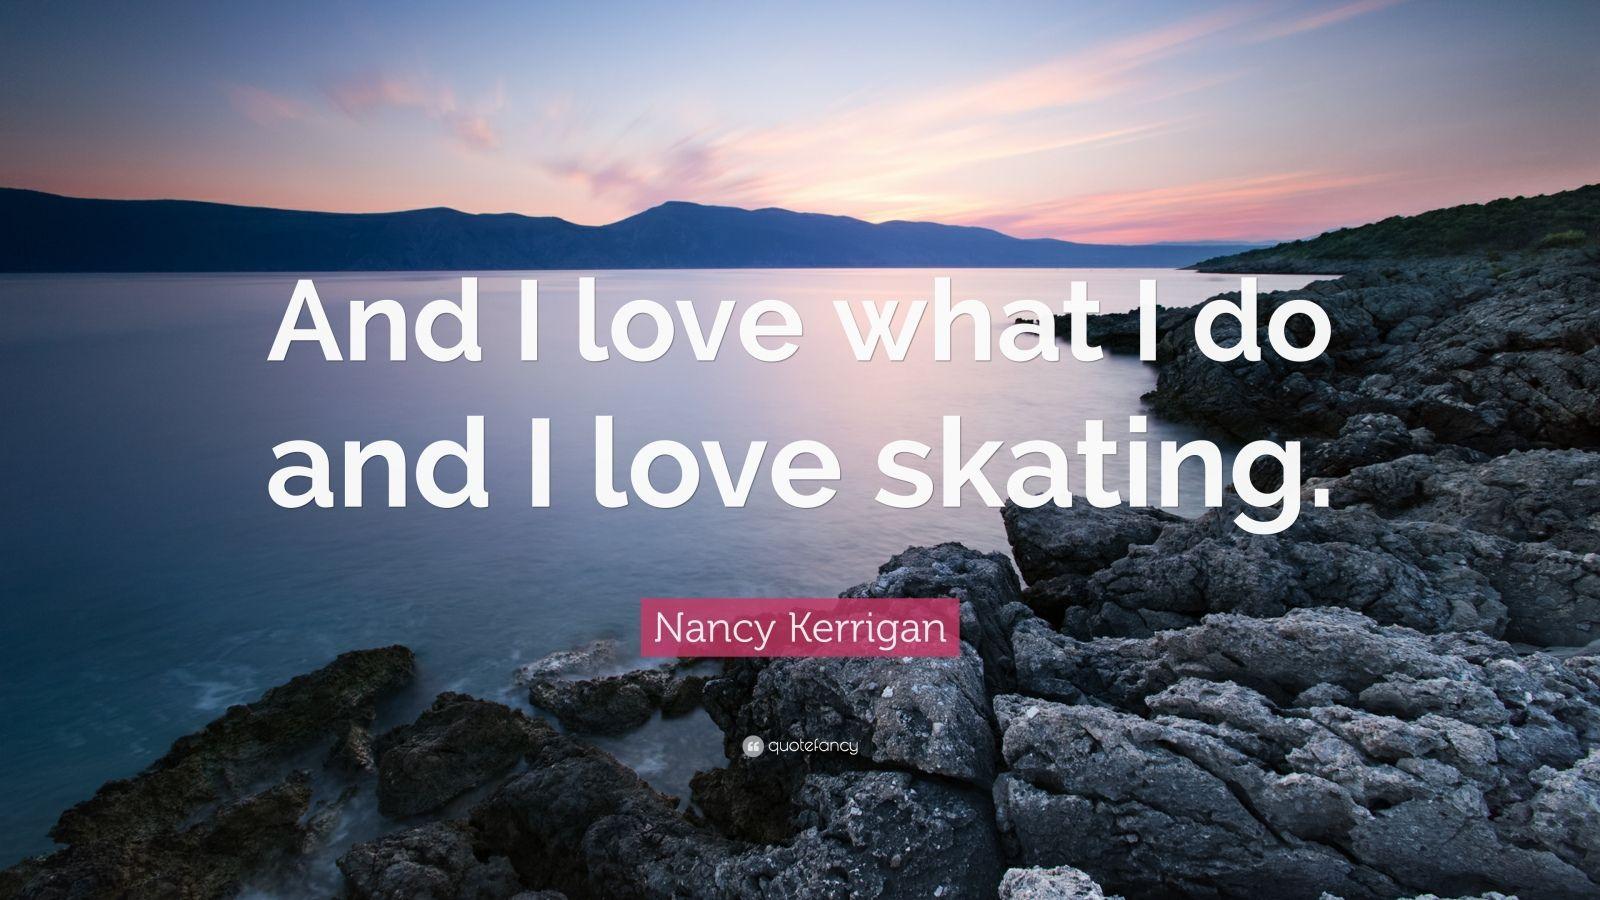 Nancy Kerrigan Quote: “And I love what I do and I love skating